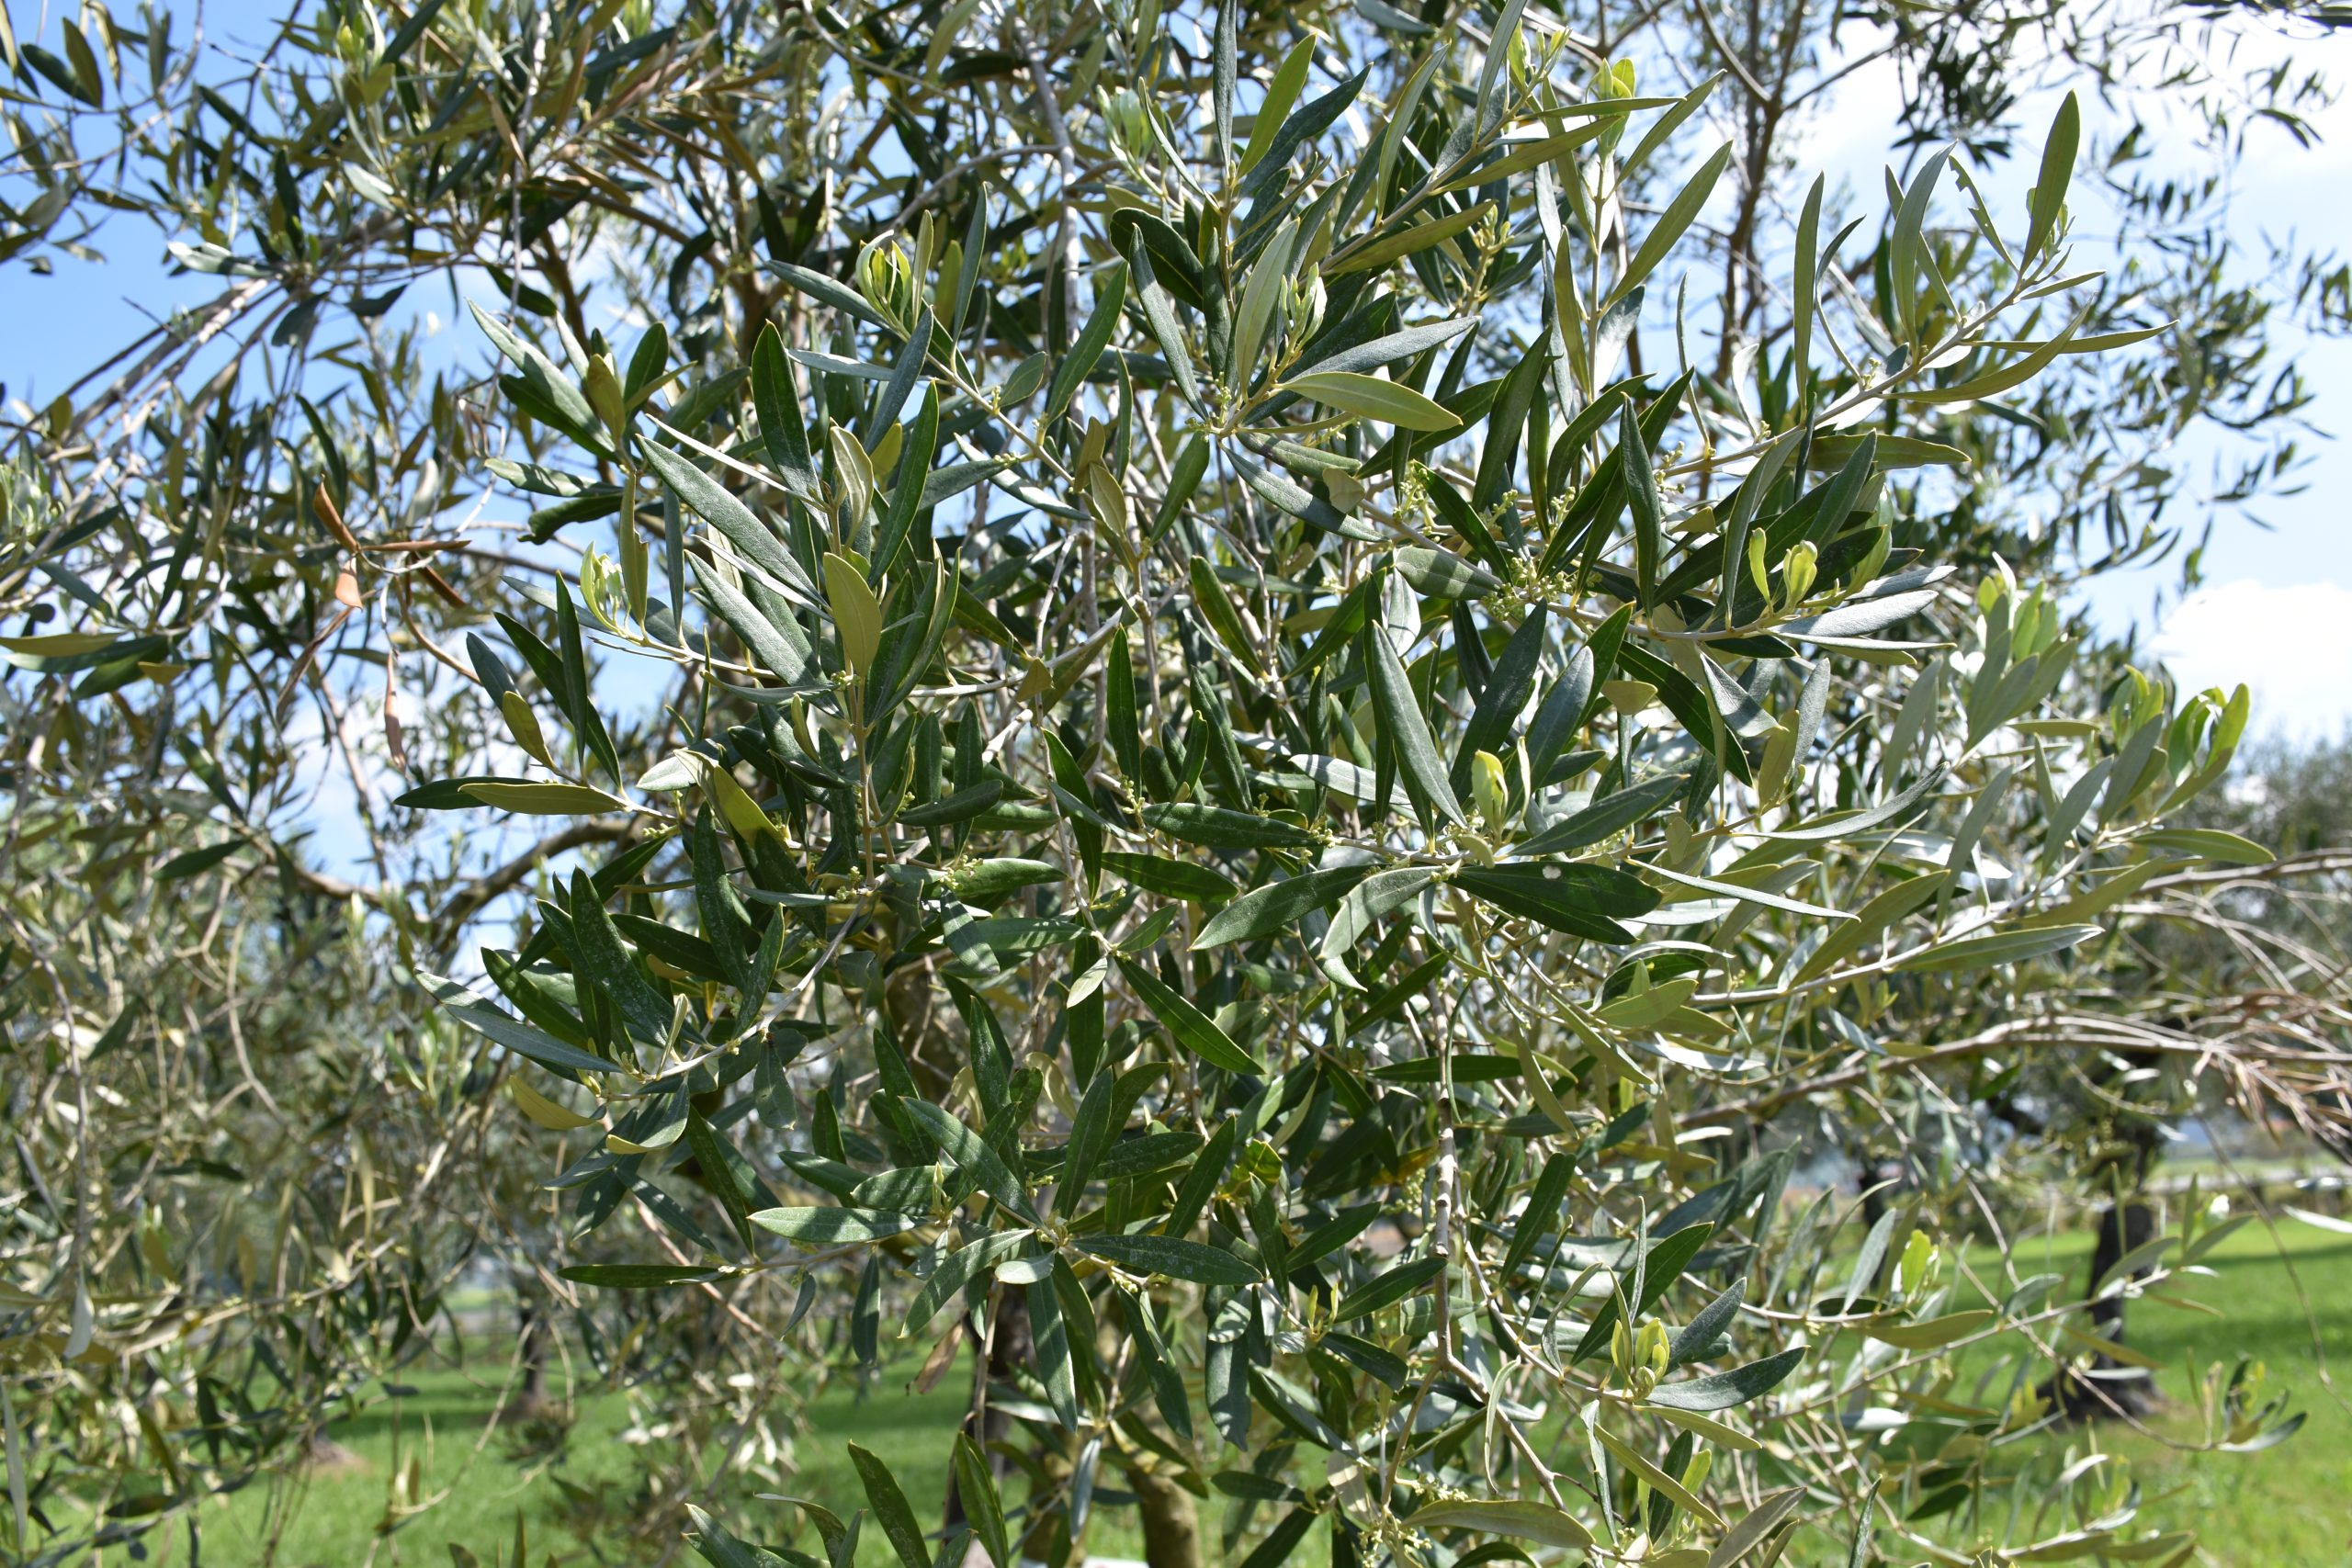 Life Resilience has been concluded: 18 olive genotypes identified as potentially resistant to Xylella fastidiosa.